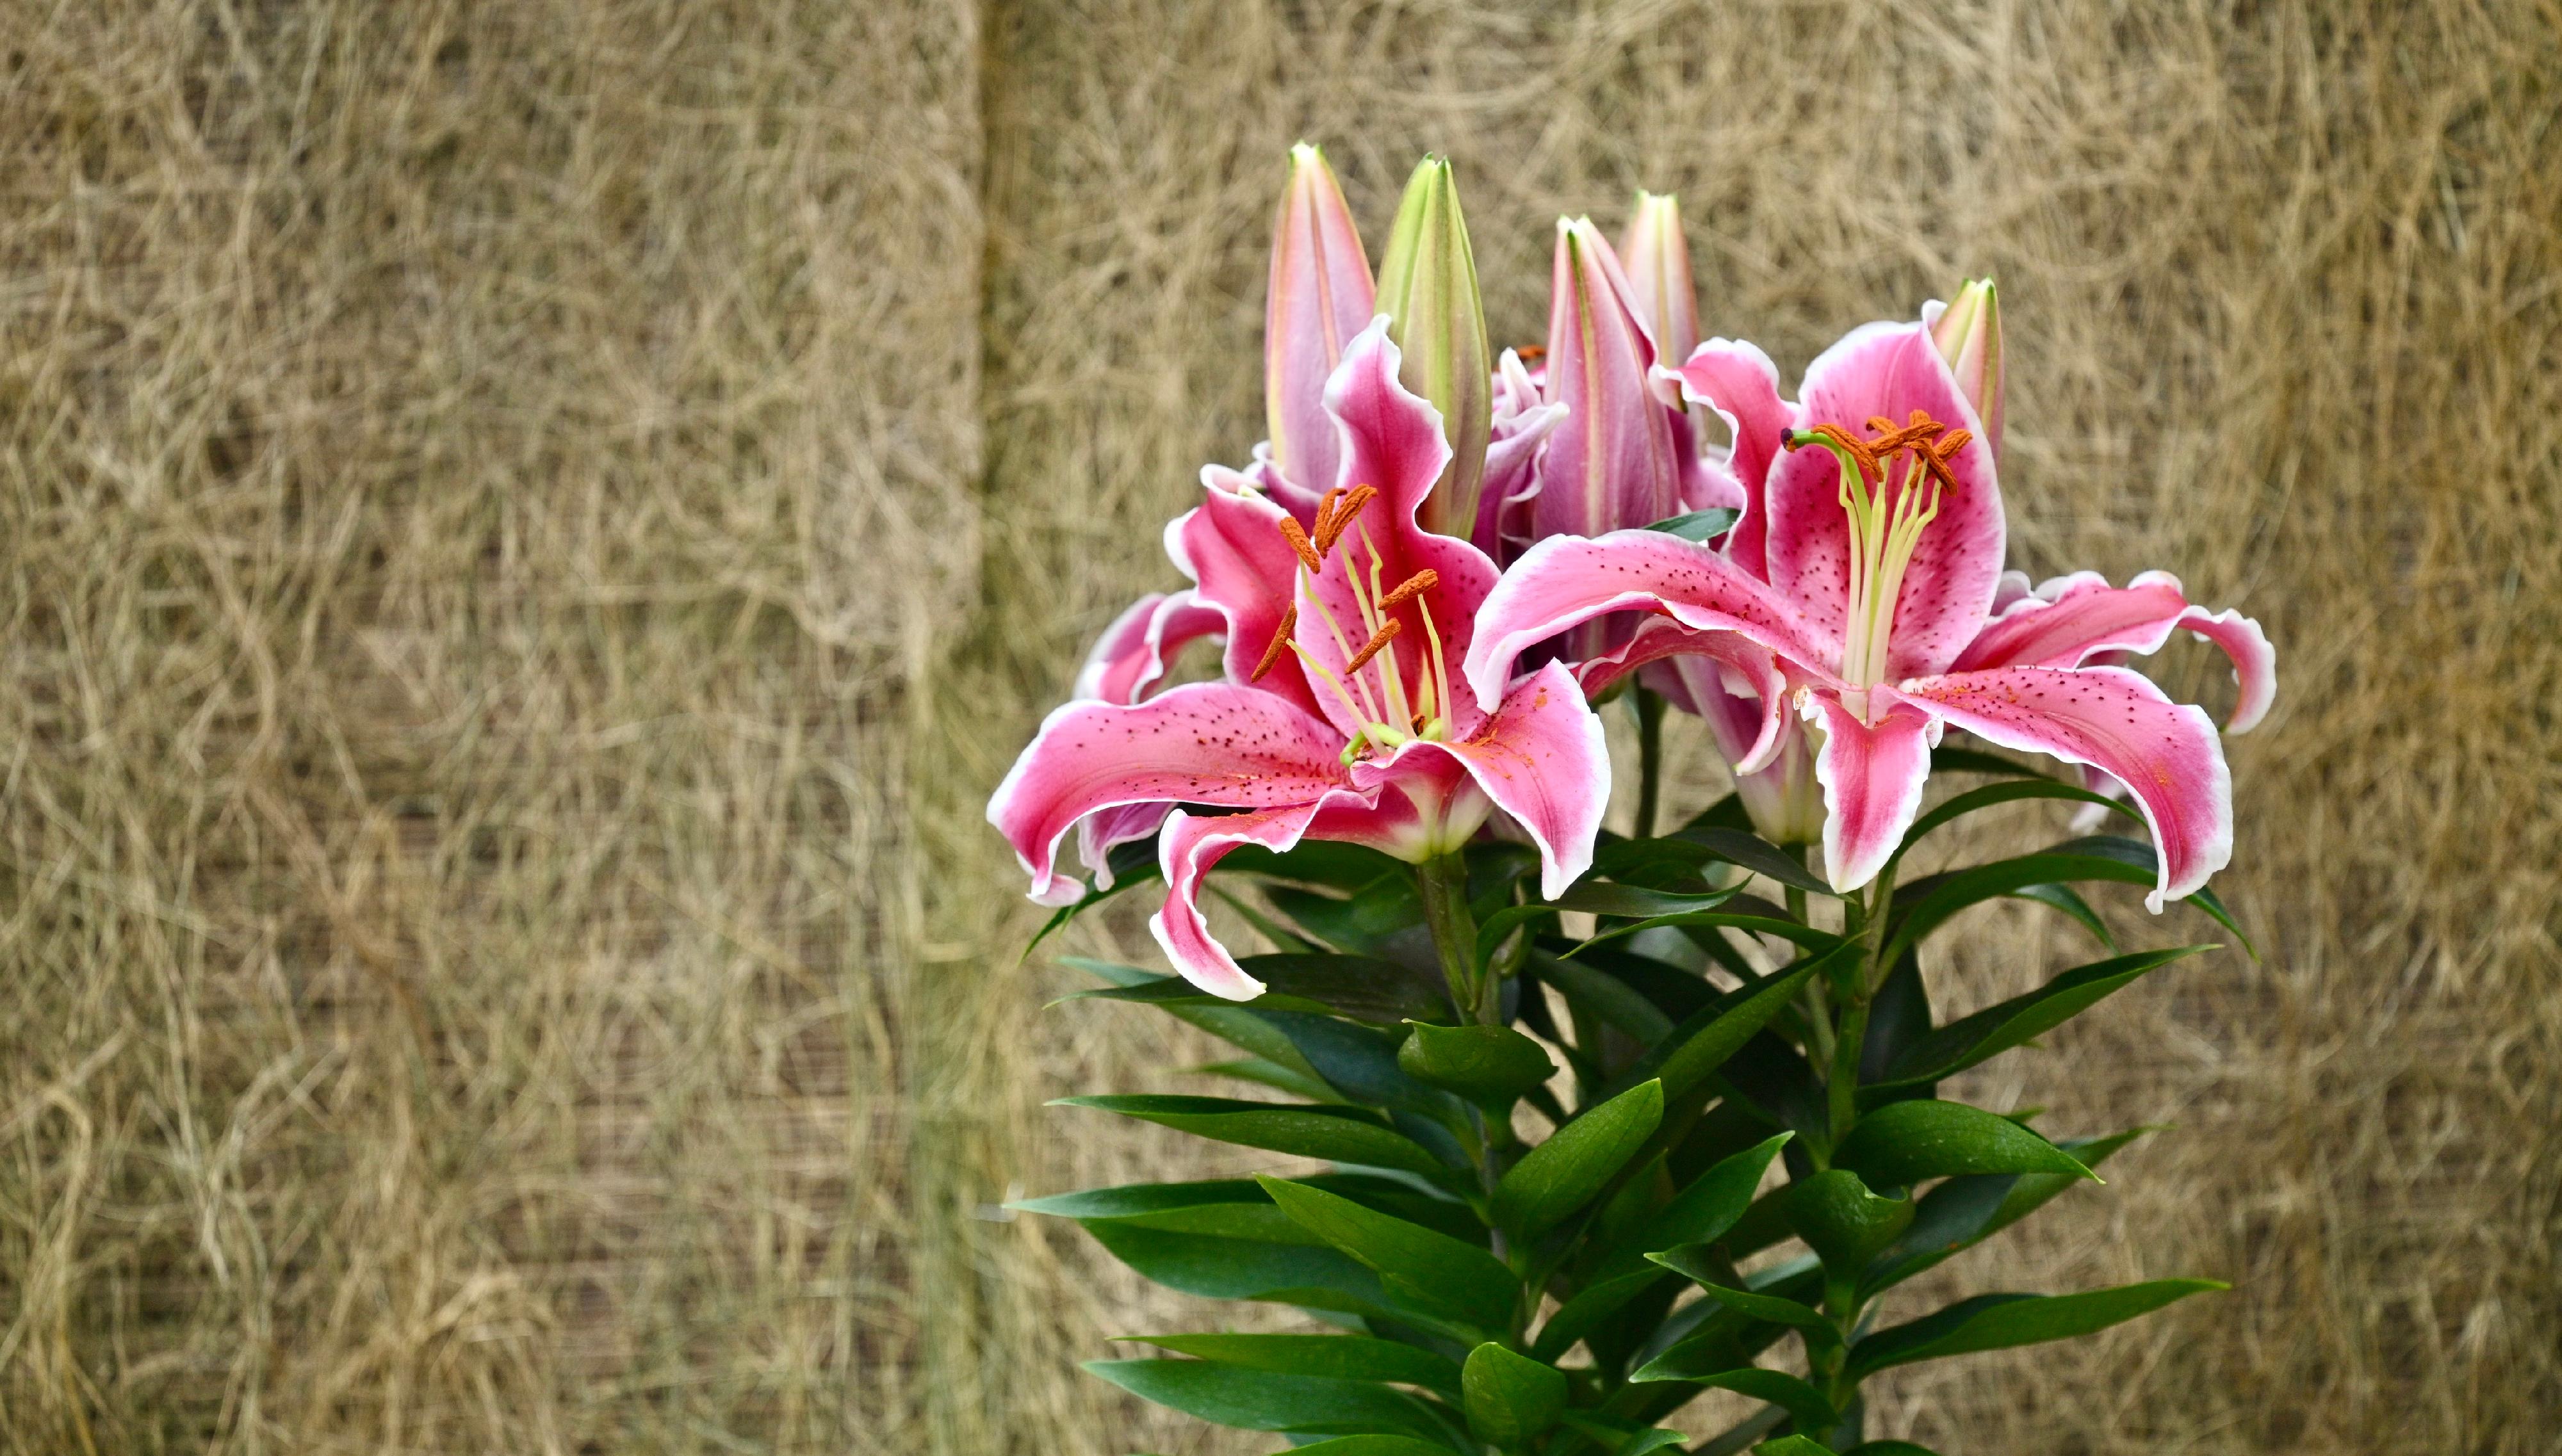 Starting from January 9, a rich variety of about 700 pots of bulb plants will be displayed at a thematic exhibition to be held at the Forsgate Conservatory in Hong Kong Park managed by the Leisure and Cultural Services Department. Photo shows a Lilium in the exhibition.